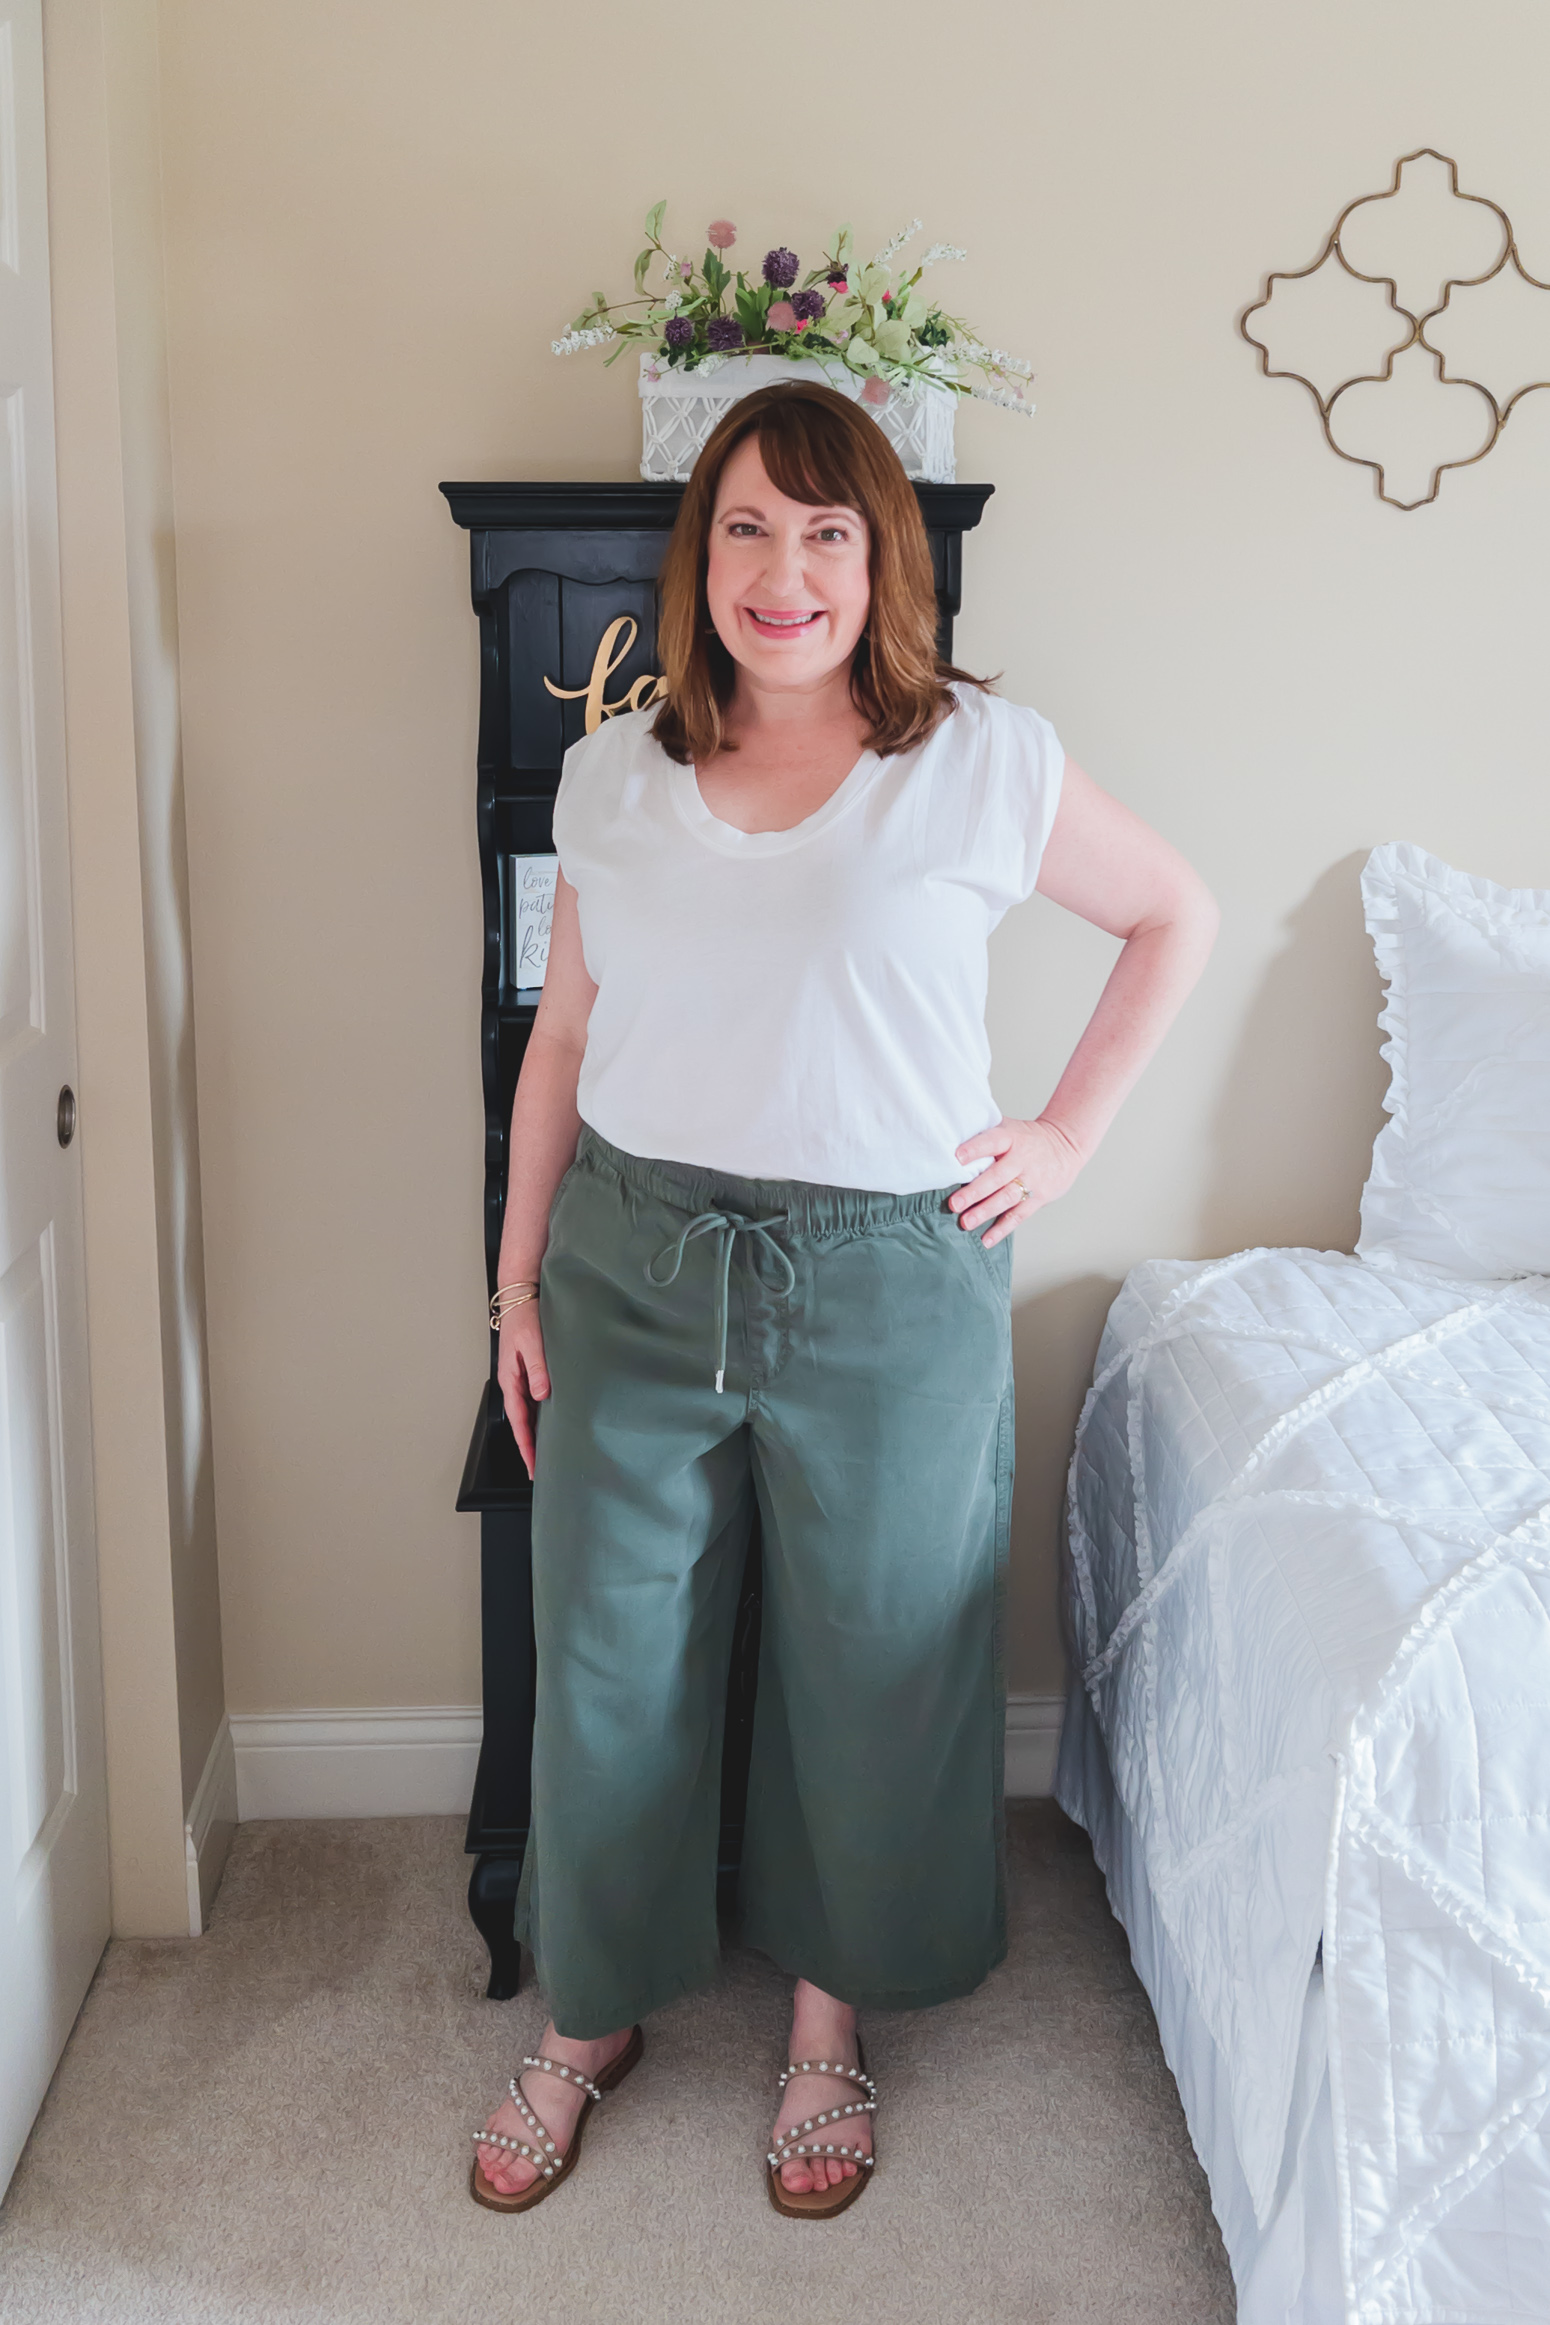 I'm 5'2, and this is what to wear or avoid if you have short and thick Legs  - Petite Dressing